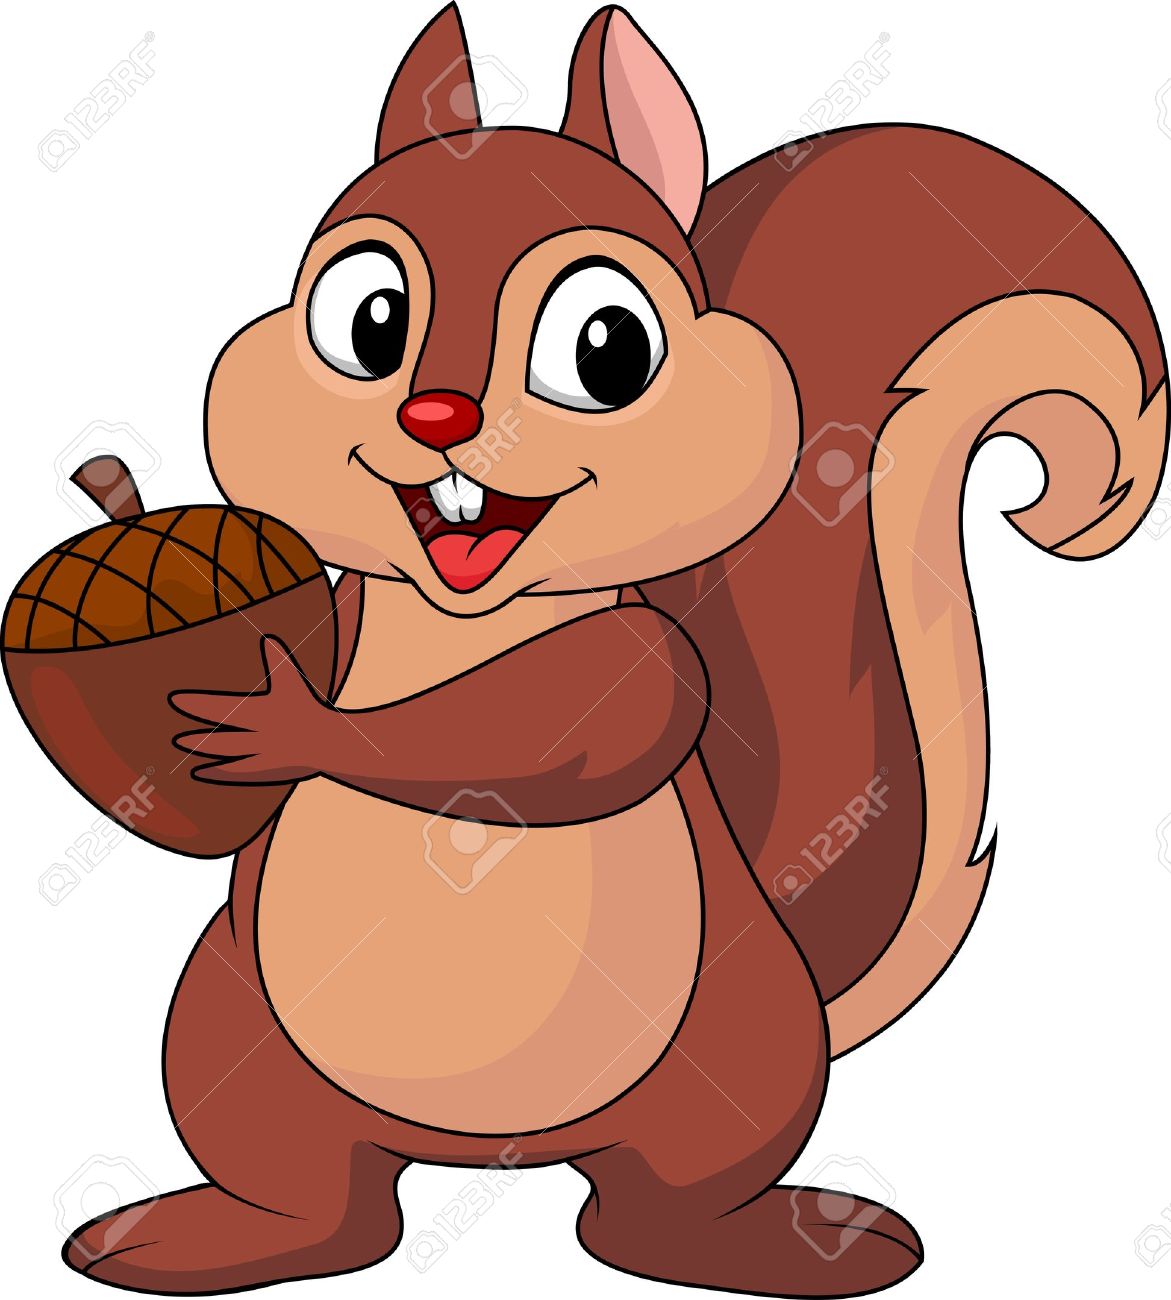 Red Squirrel clipart #12, Download drawings